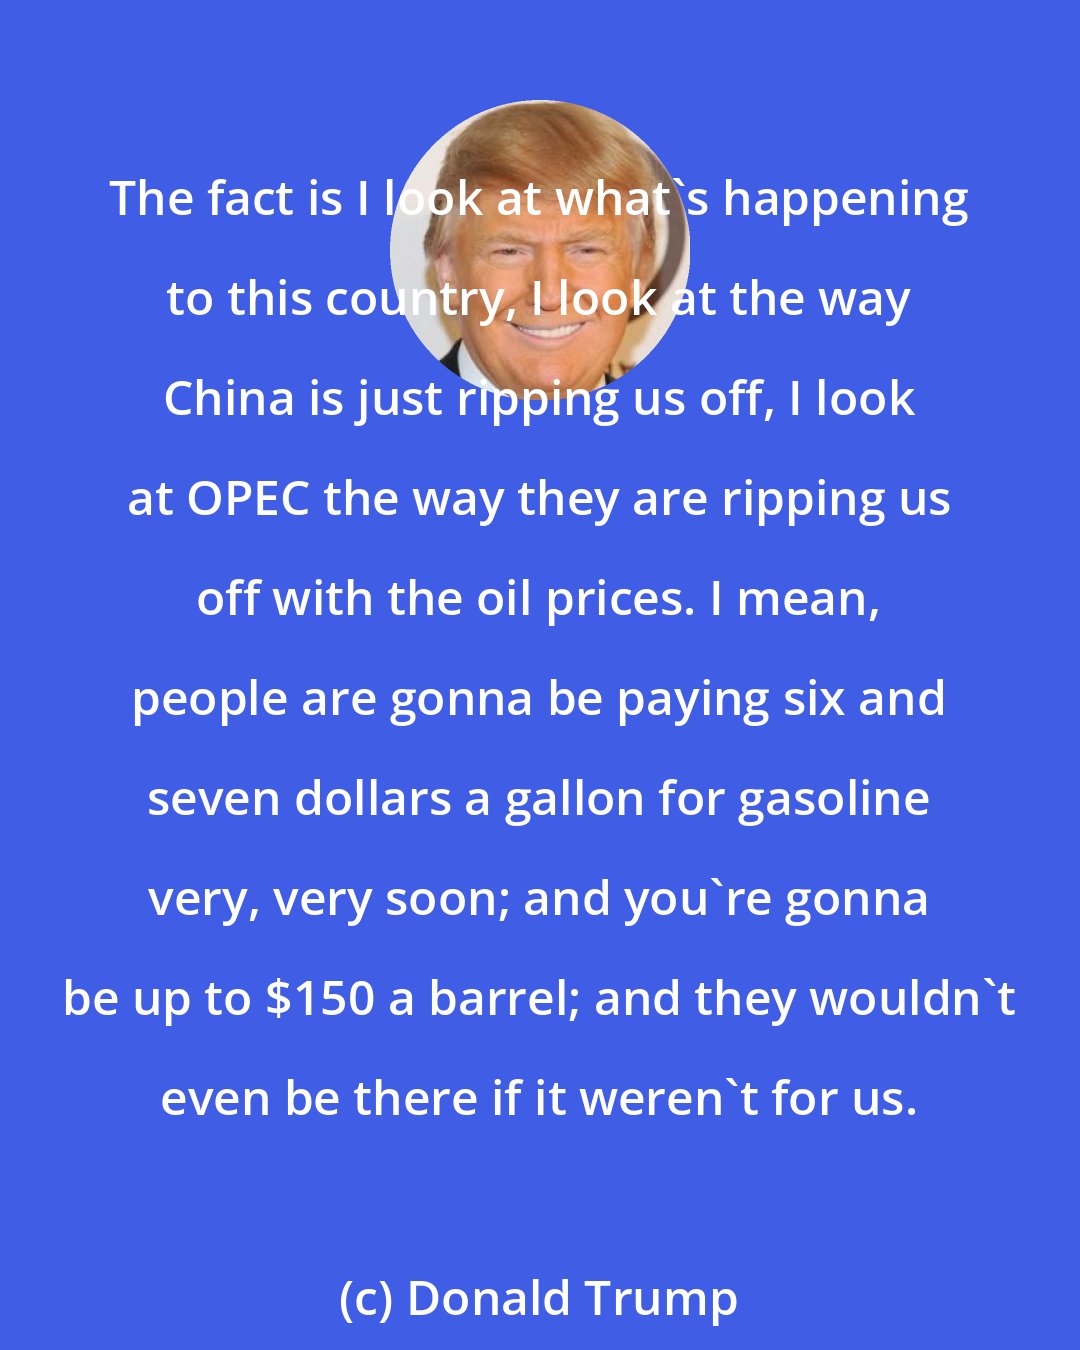 Donald Trump: The fact is I look at what's happening to this country, I look at the way China is just ripping us off, I look at OPEC the way they are ripping us off with the oil prices. I mean, people are gonna be paying six and seven dollars a gallon for gasoline very, very soon; and you're gonna be up to $150 a barrel; and they wouldn't even be there if it weren't for us.